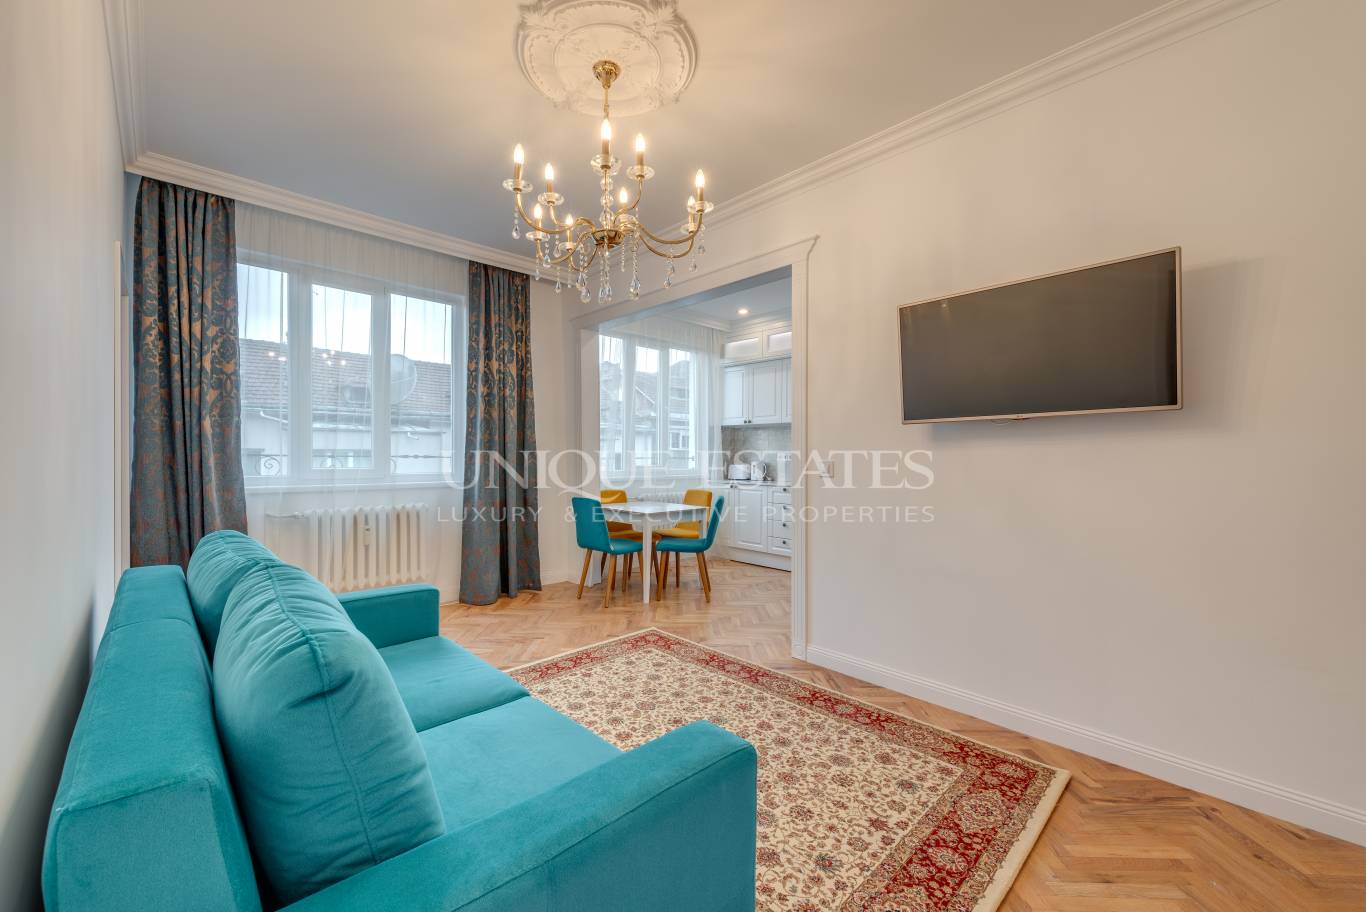 Apartment for rent in Sofia, Downtown with listing ID: N17770 - image 3